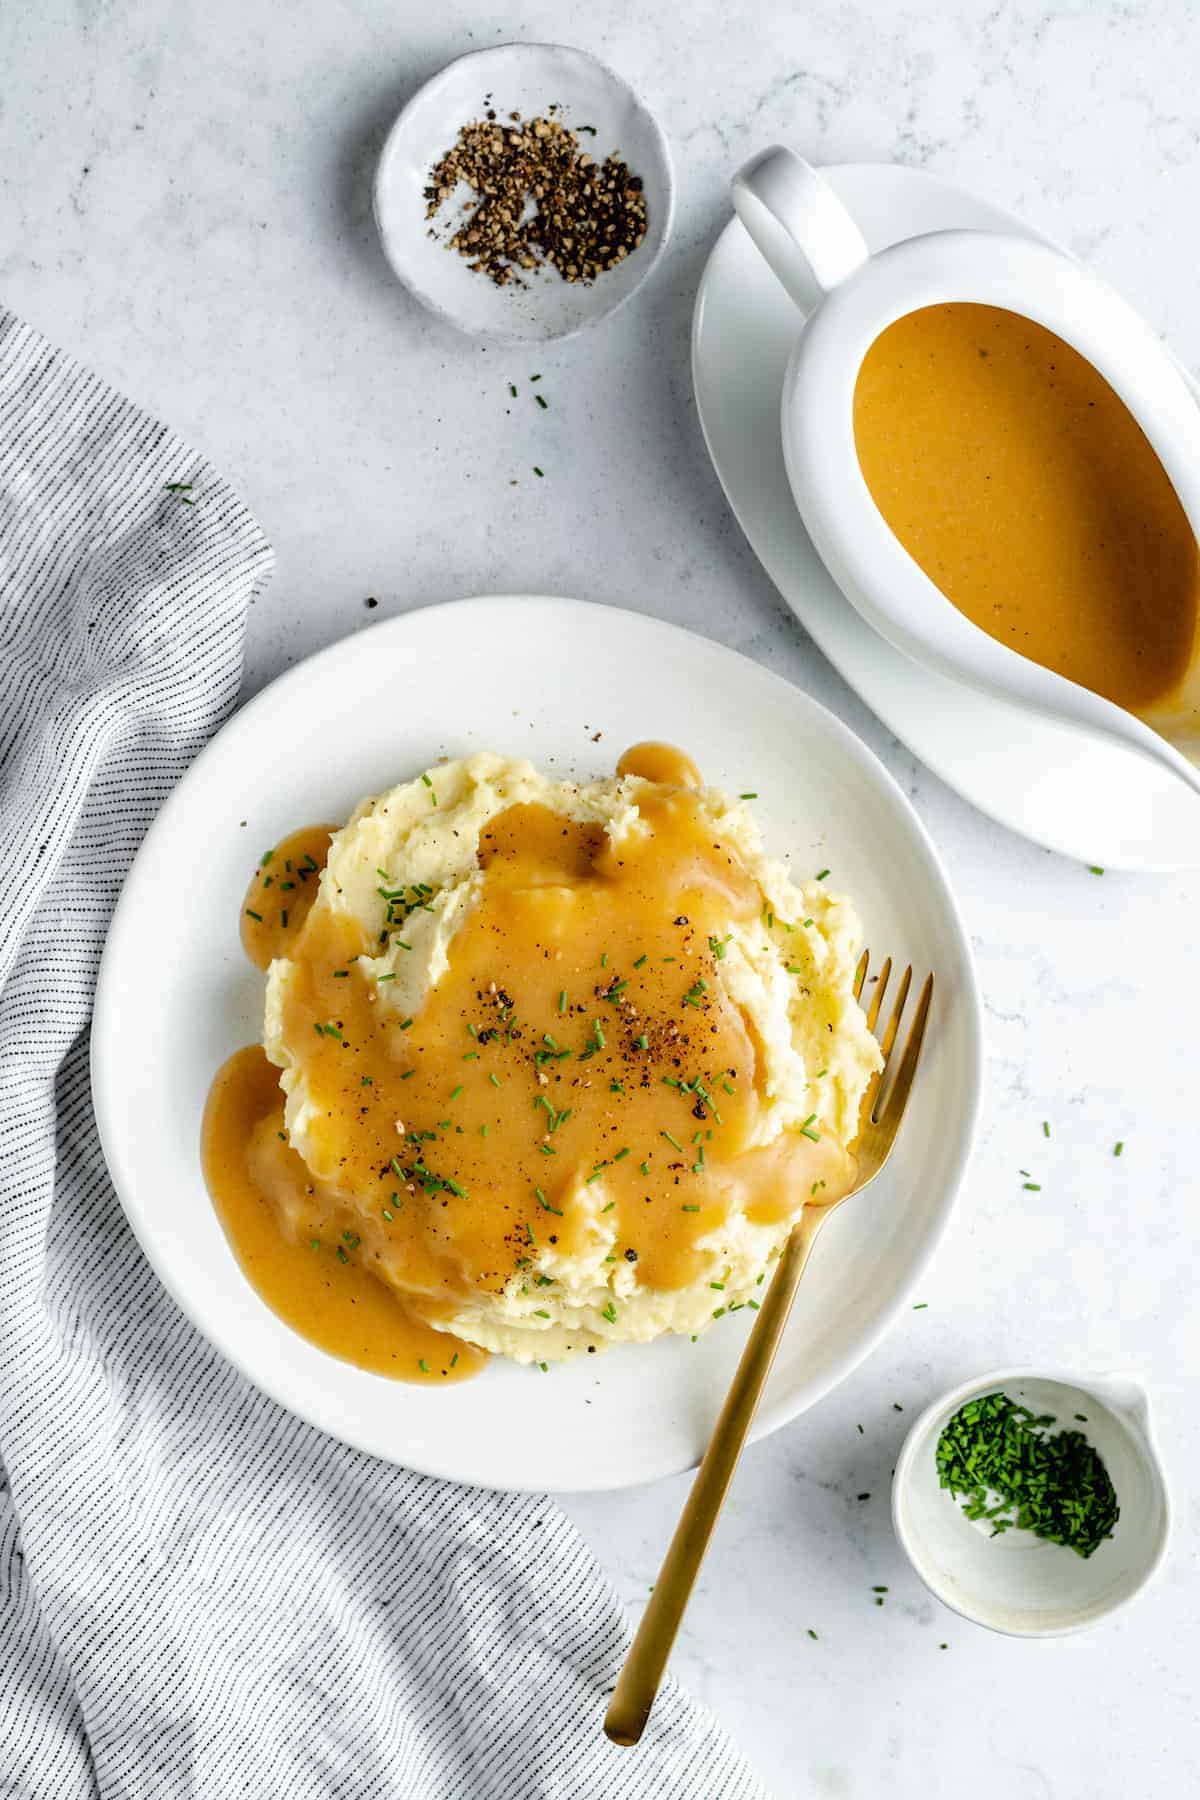 Overhead shot of mashed potatoes on plate with gravy